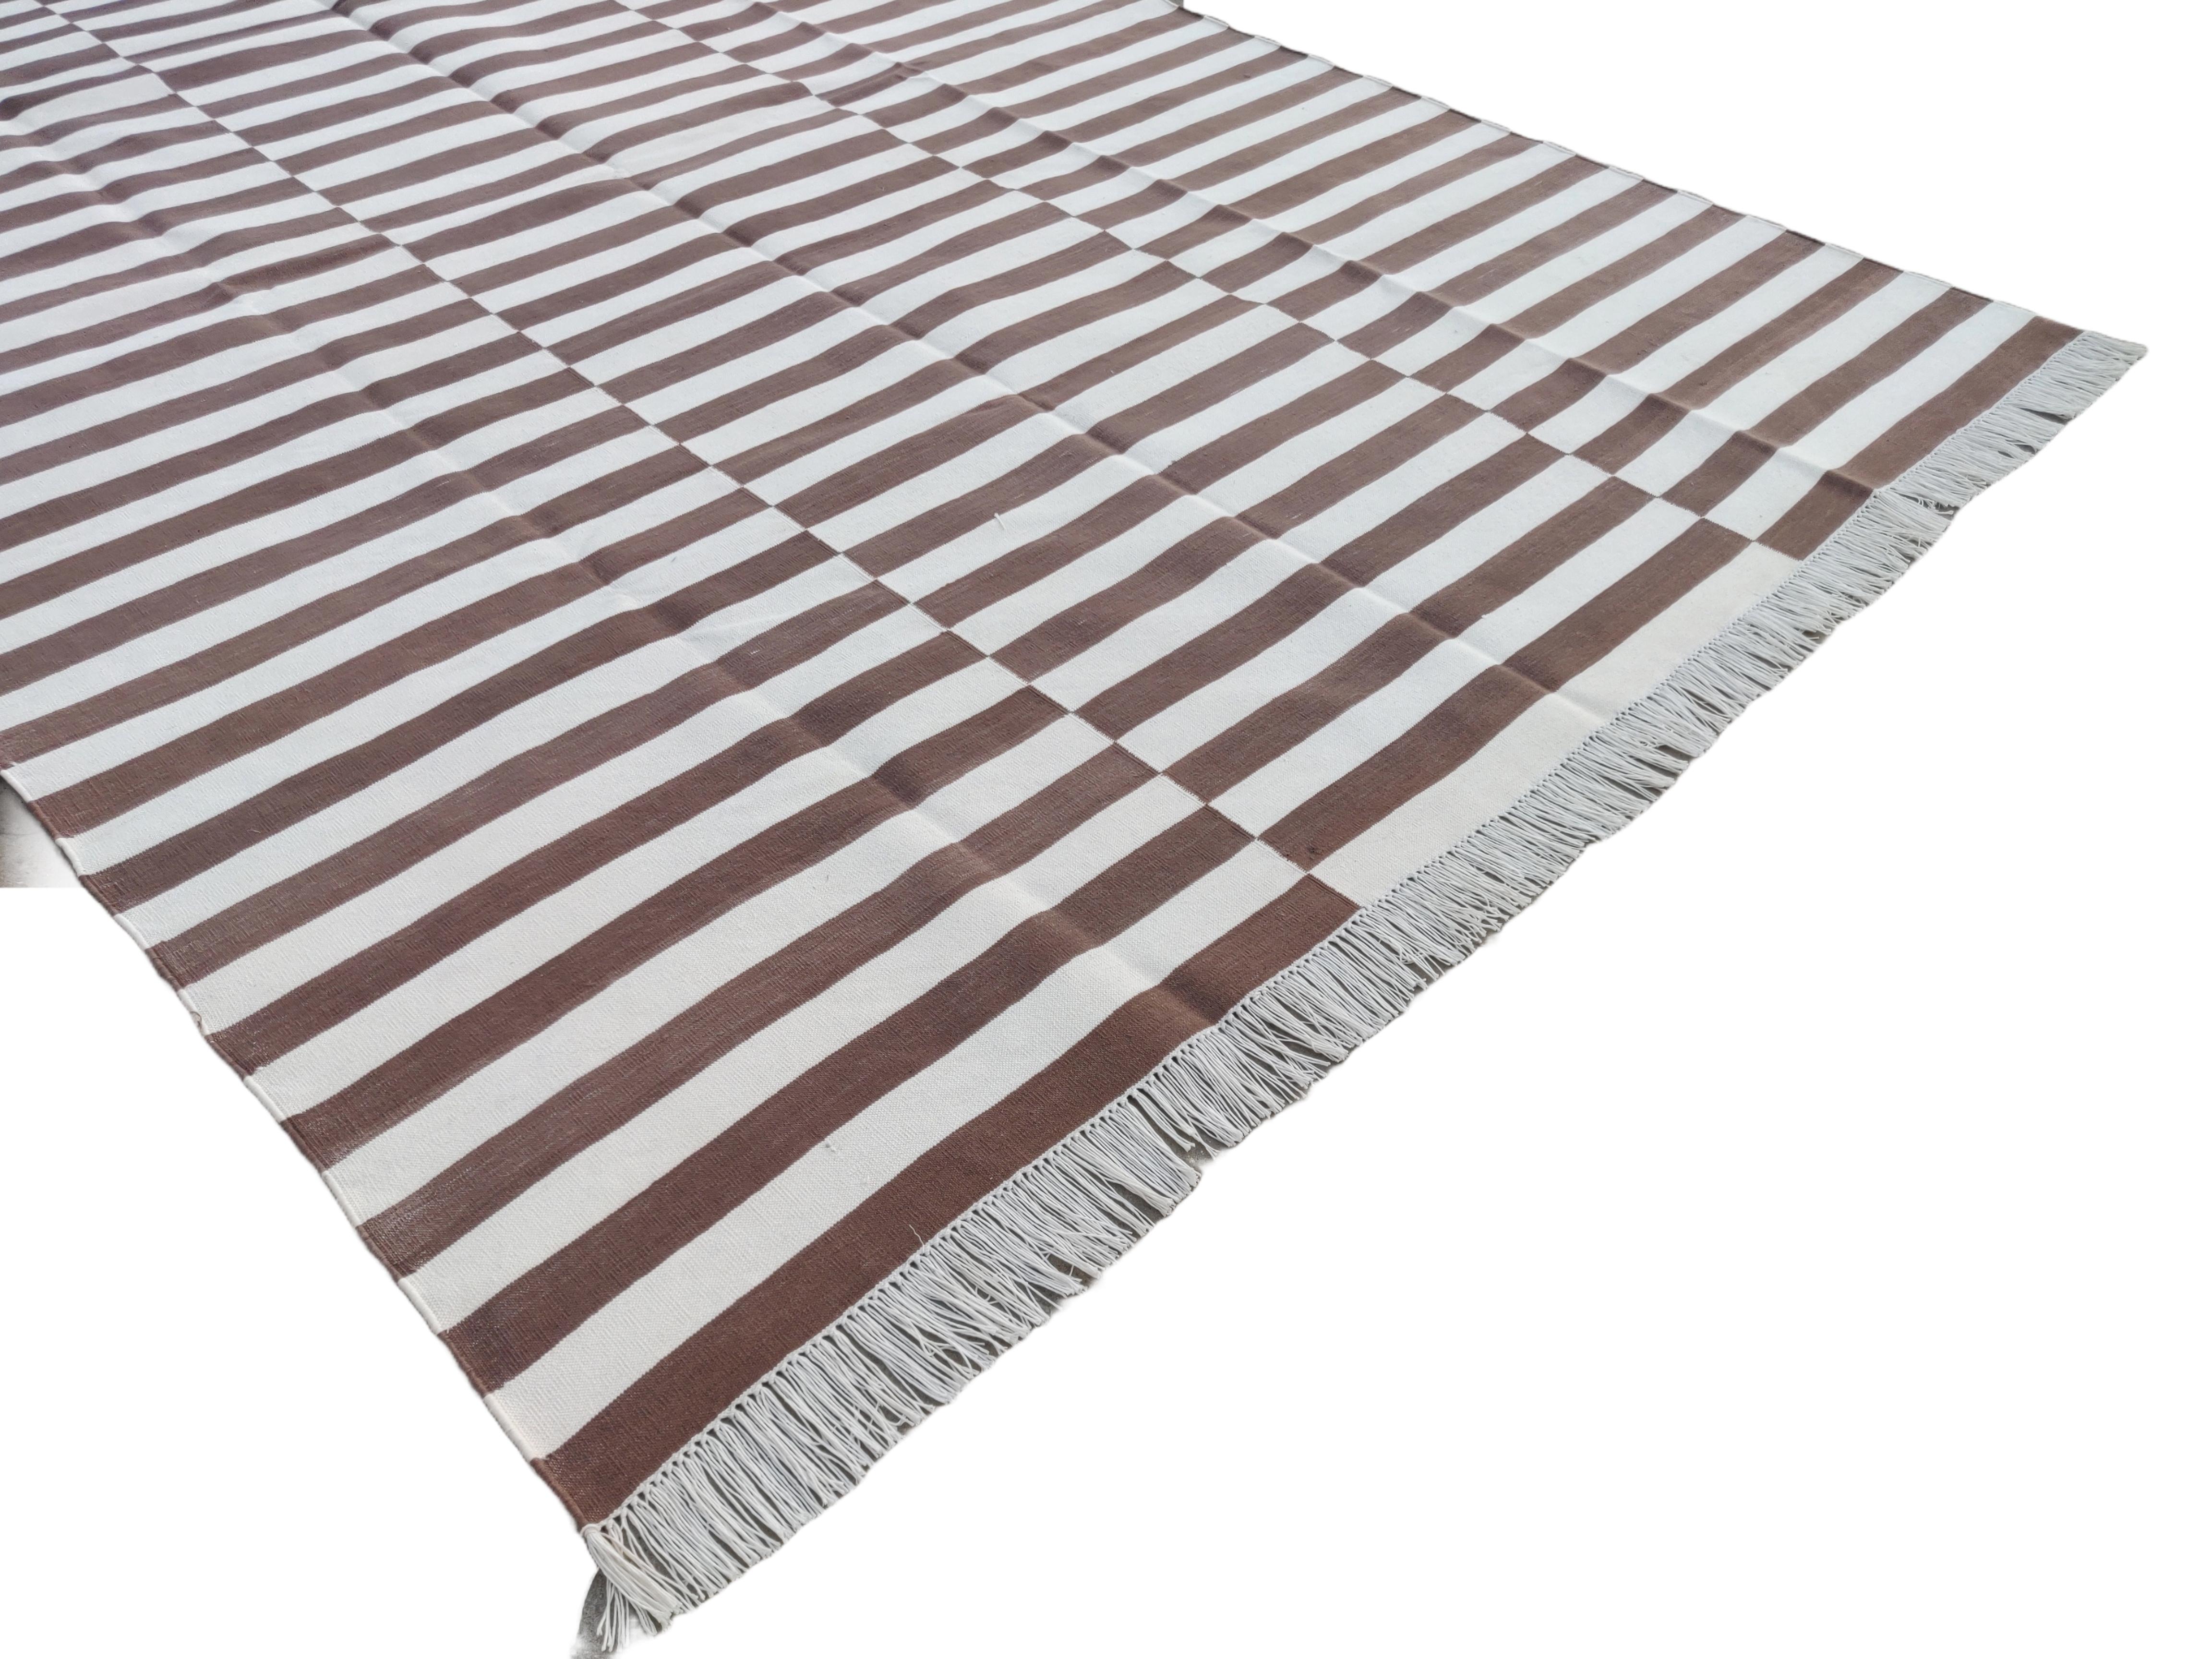 Hand-Woven Handmade Cotton Area Flat Weave Rug, Brown And White Striped Indian Dhurrie Rug For Sale